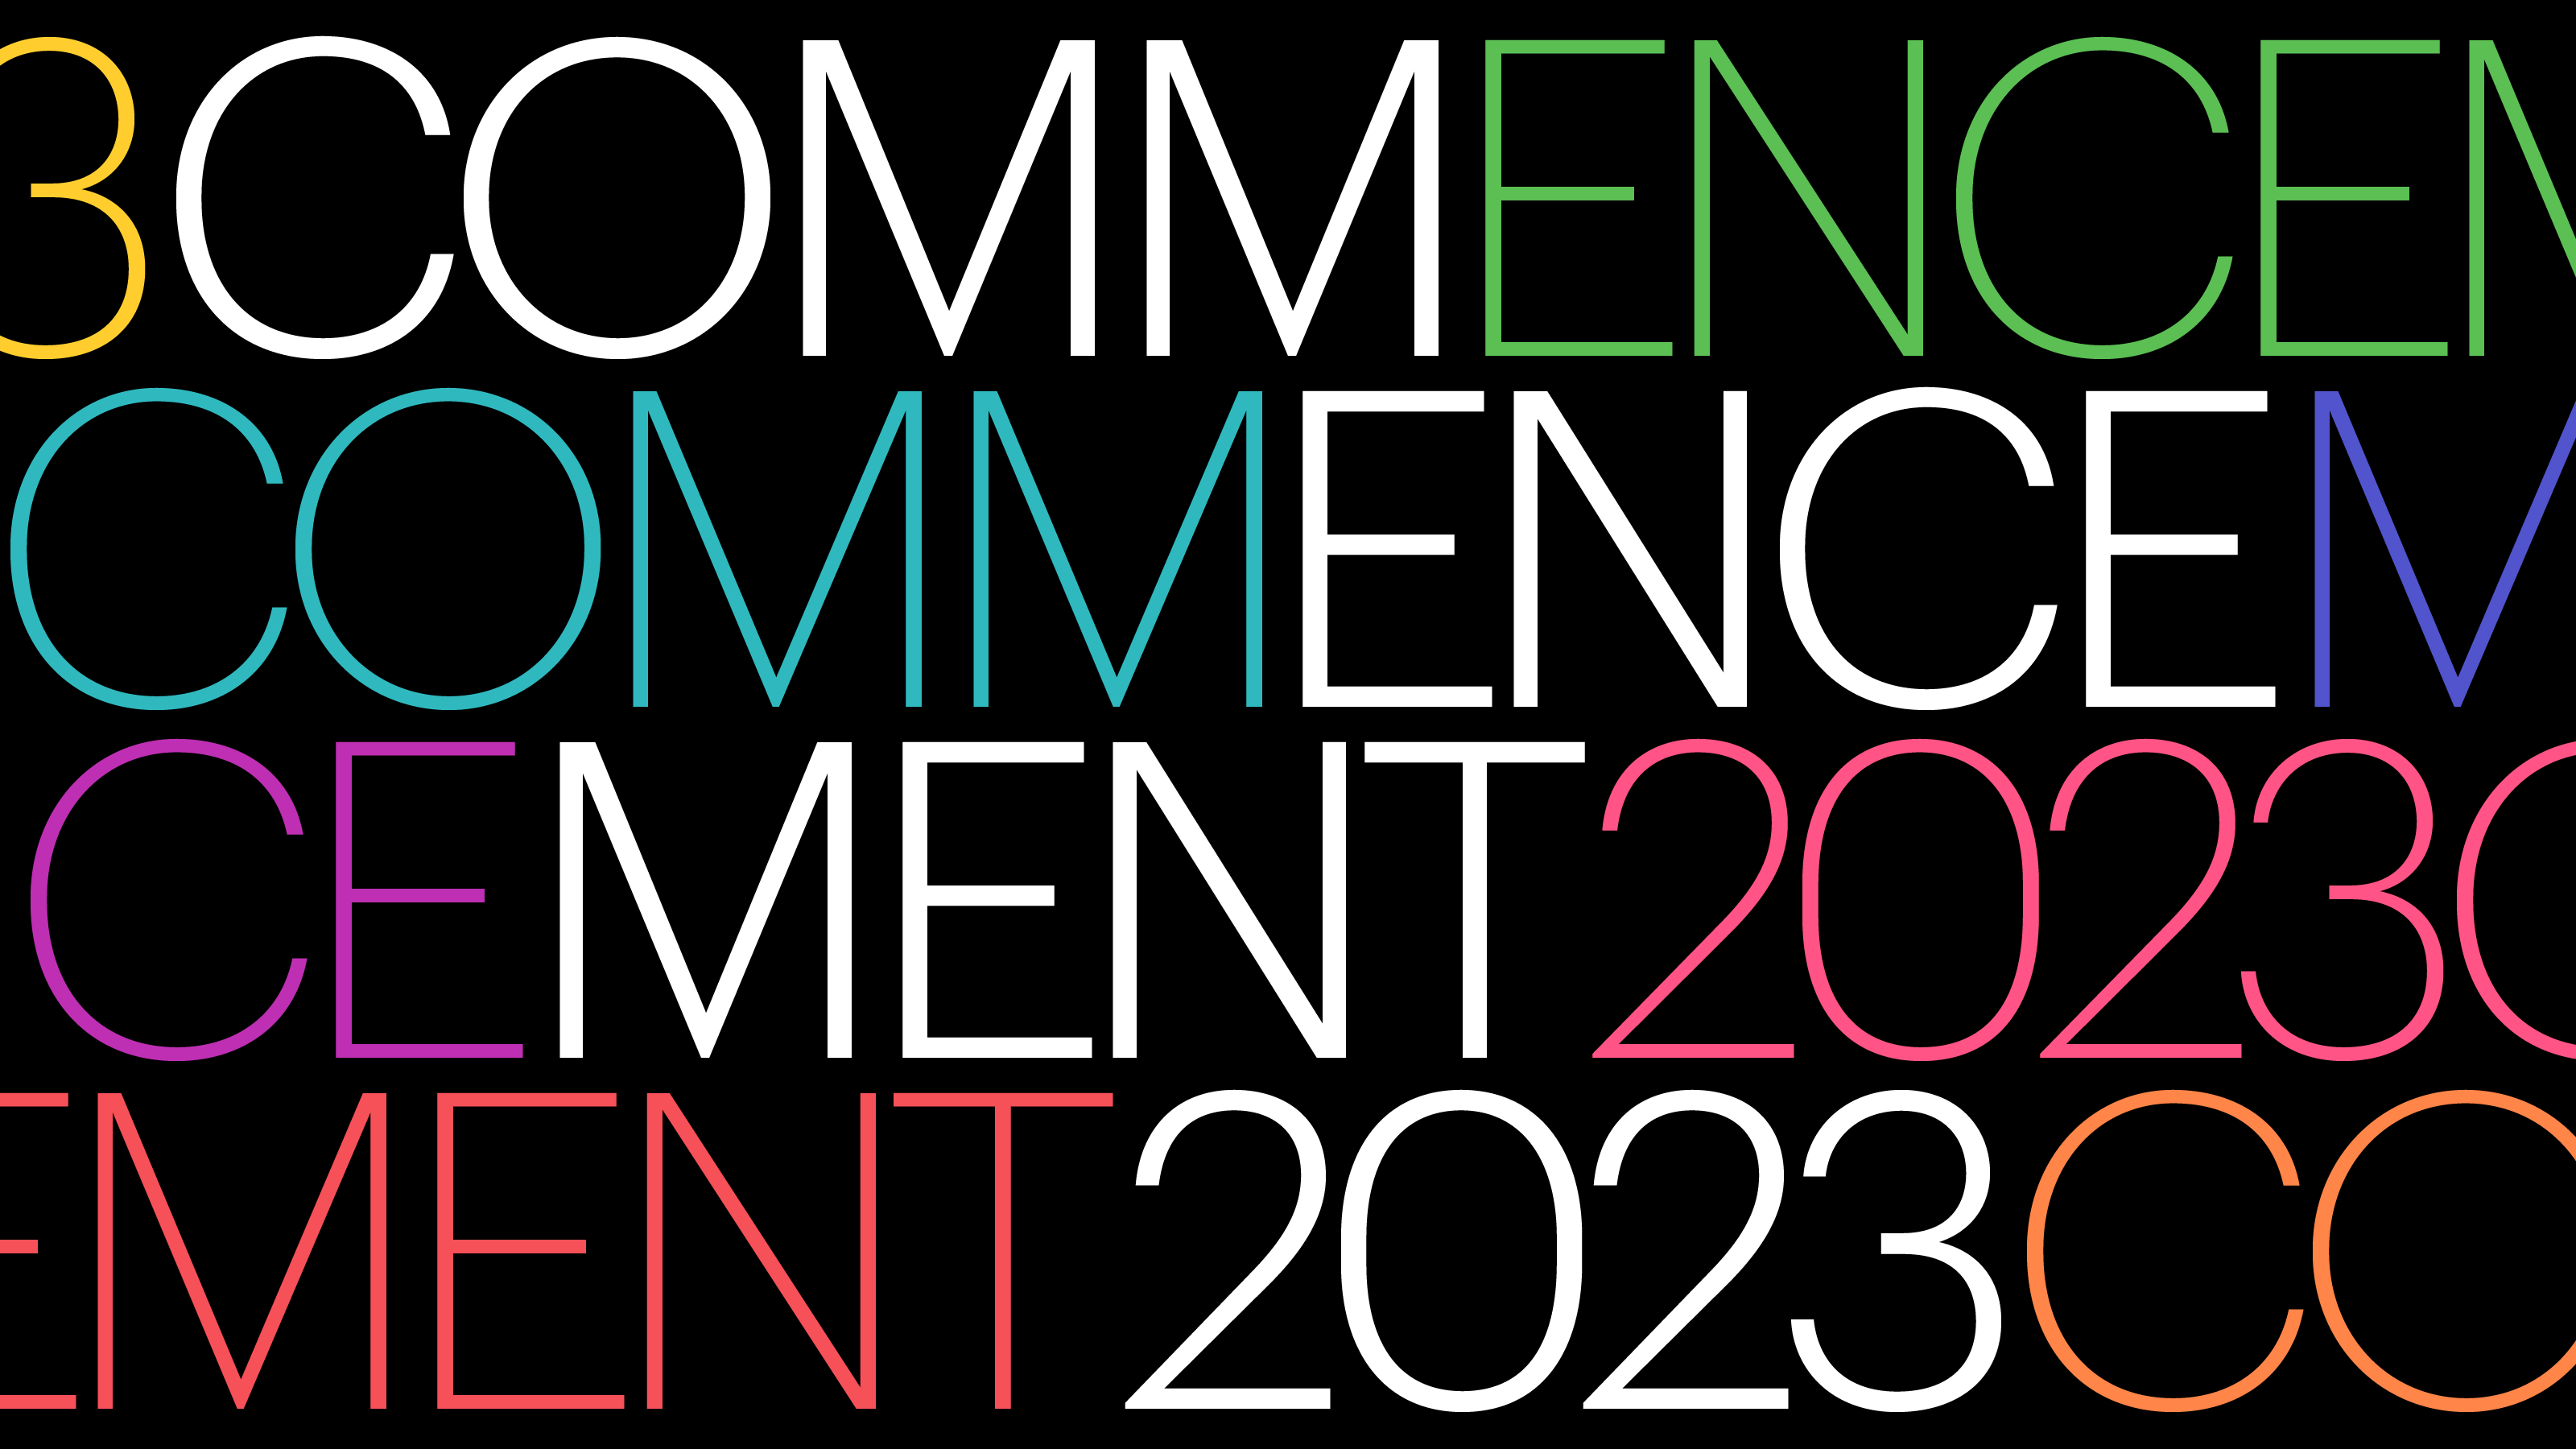 commencement 2023 logo image, with the word commencement stacked vertically, but offset, with various colors for each syllable in the word commencement